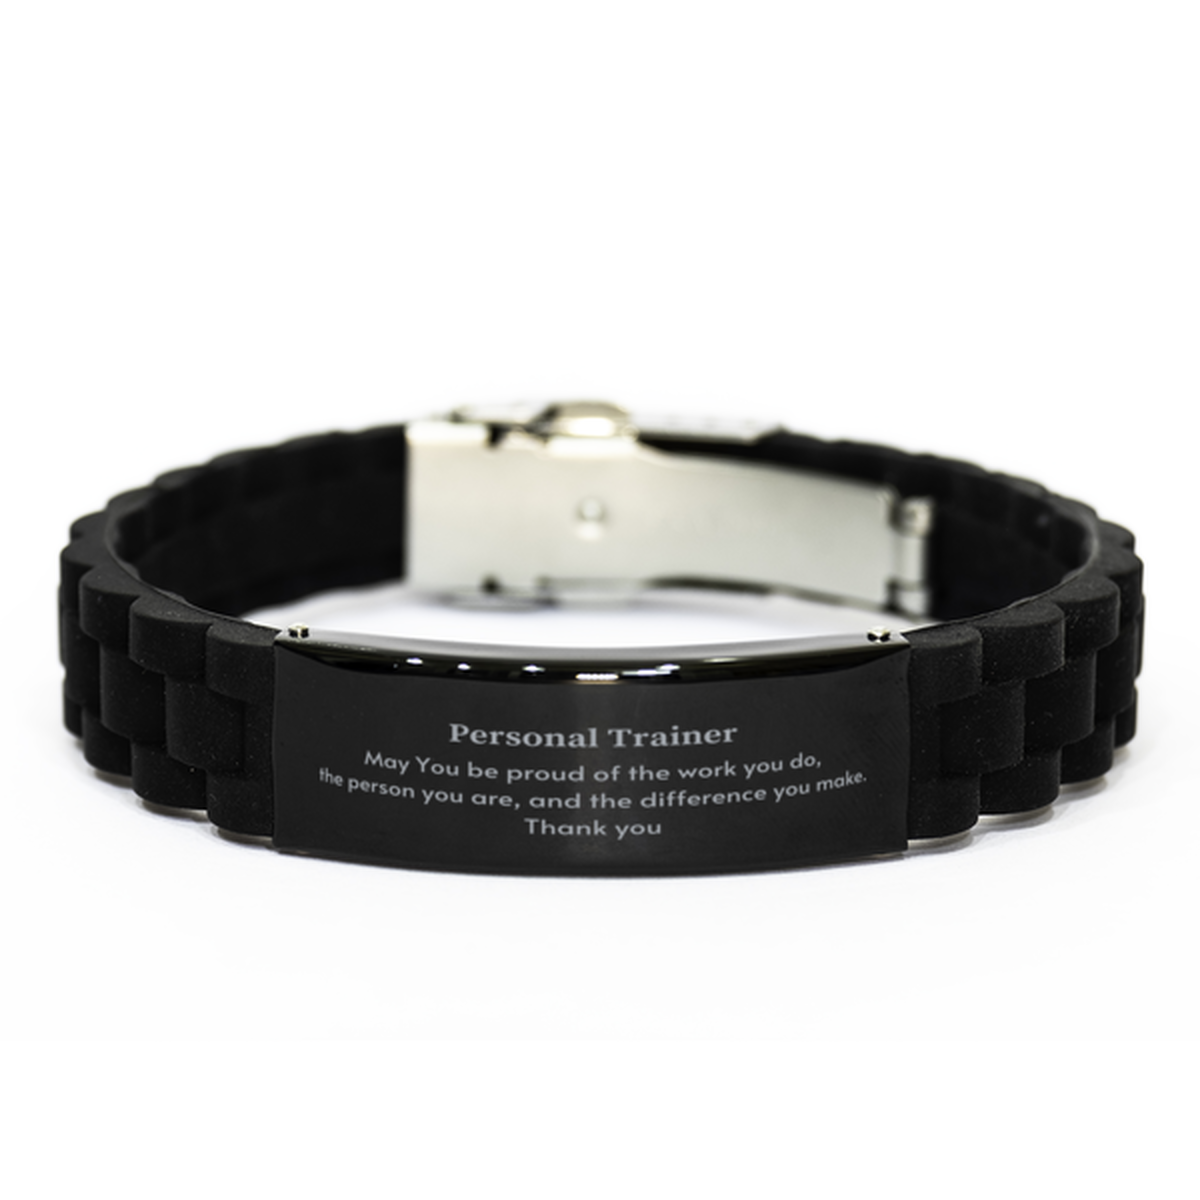 Heartwarming Black Glidelock Clasp Bracelet Retirement Coworkers Gifts for Personal Trainer, Personal Trainer May You be proud of the work you do, the person you are Gifts for Boss Men Women Friends